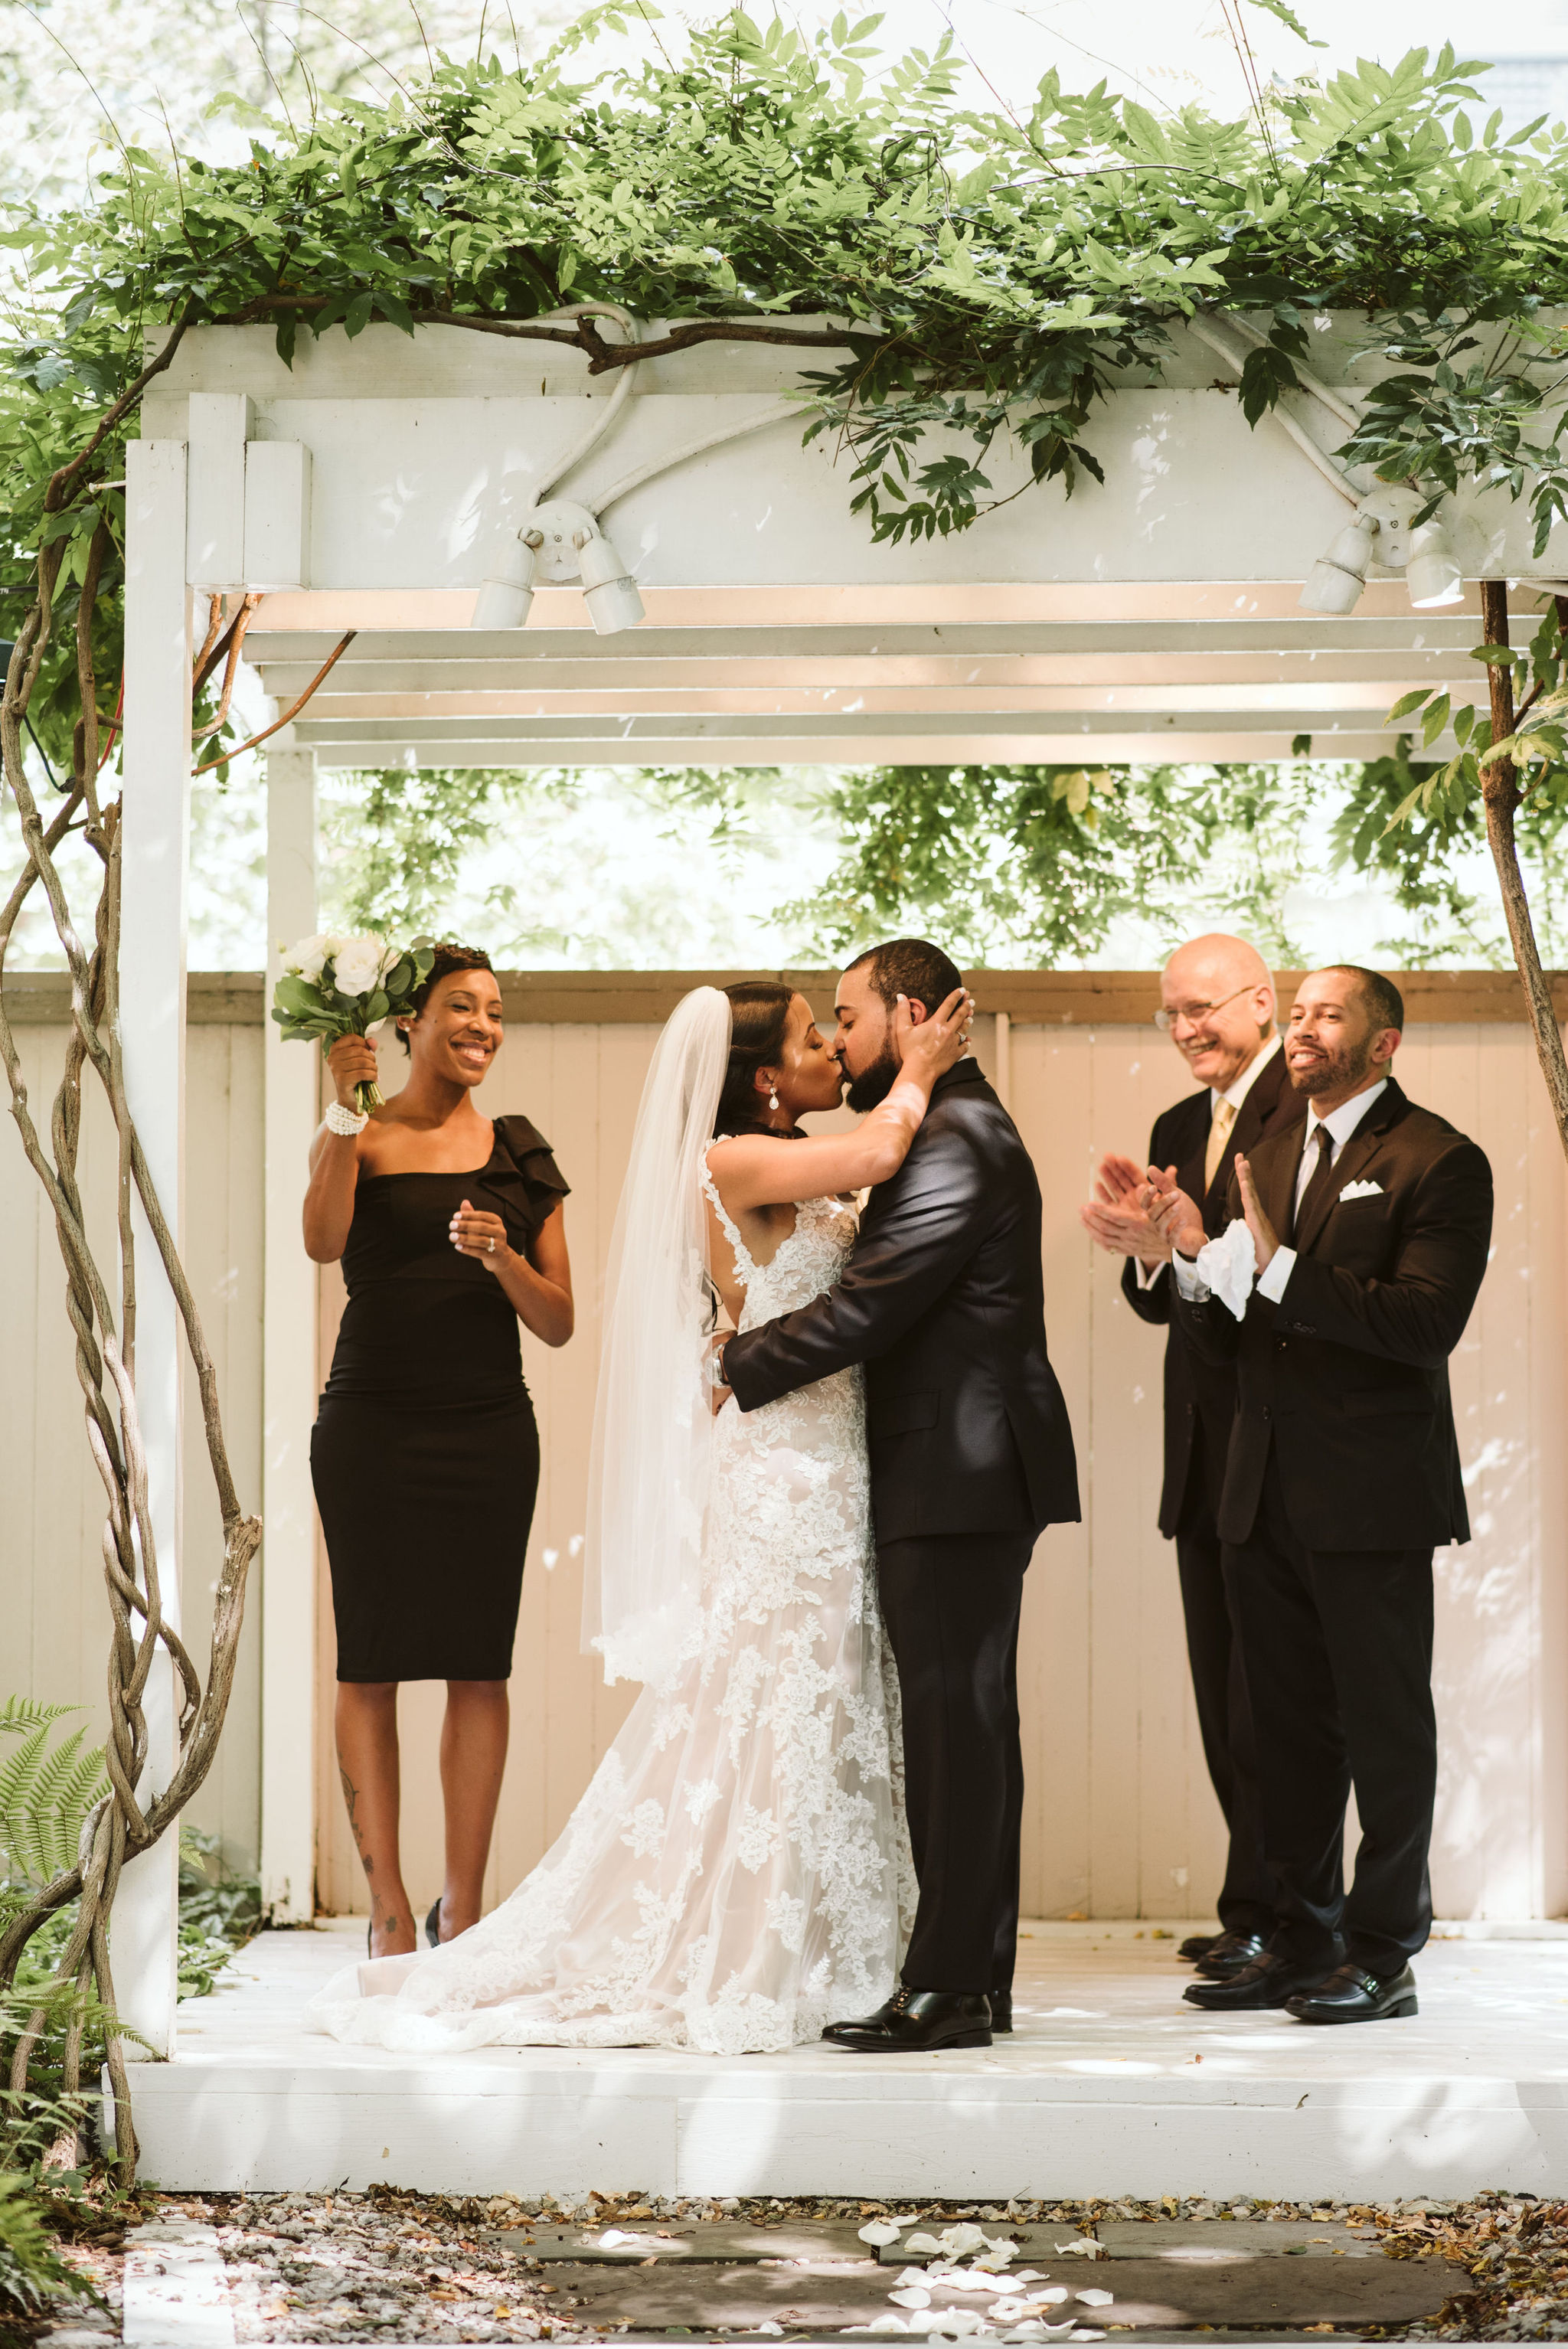  Baltimore, Maryland Wedding Photographer, Mount Vernon, Chase Court, Classic, Outdoor Ceremony, Garden, Romantic, Bride and Groom Sharing First Kiss, Just Married 